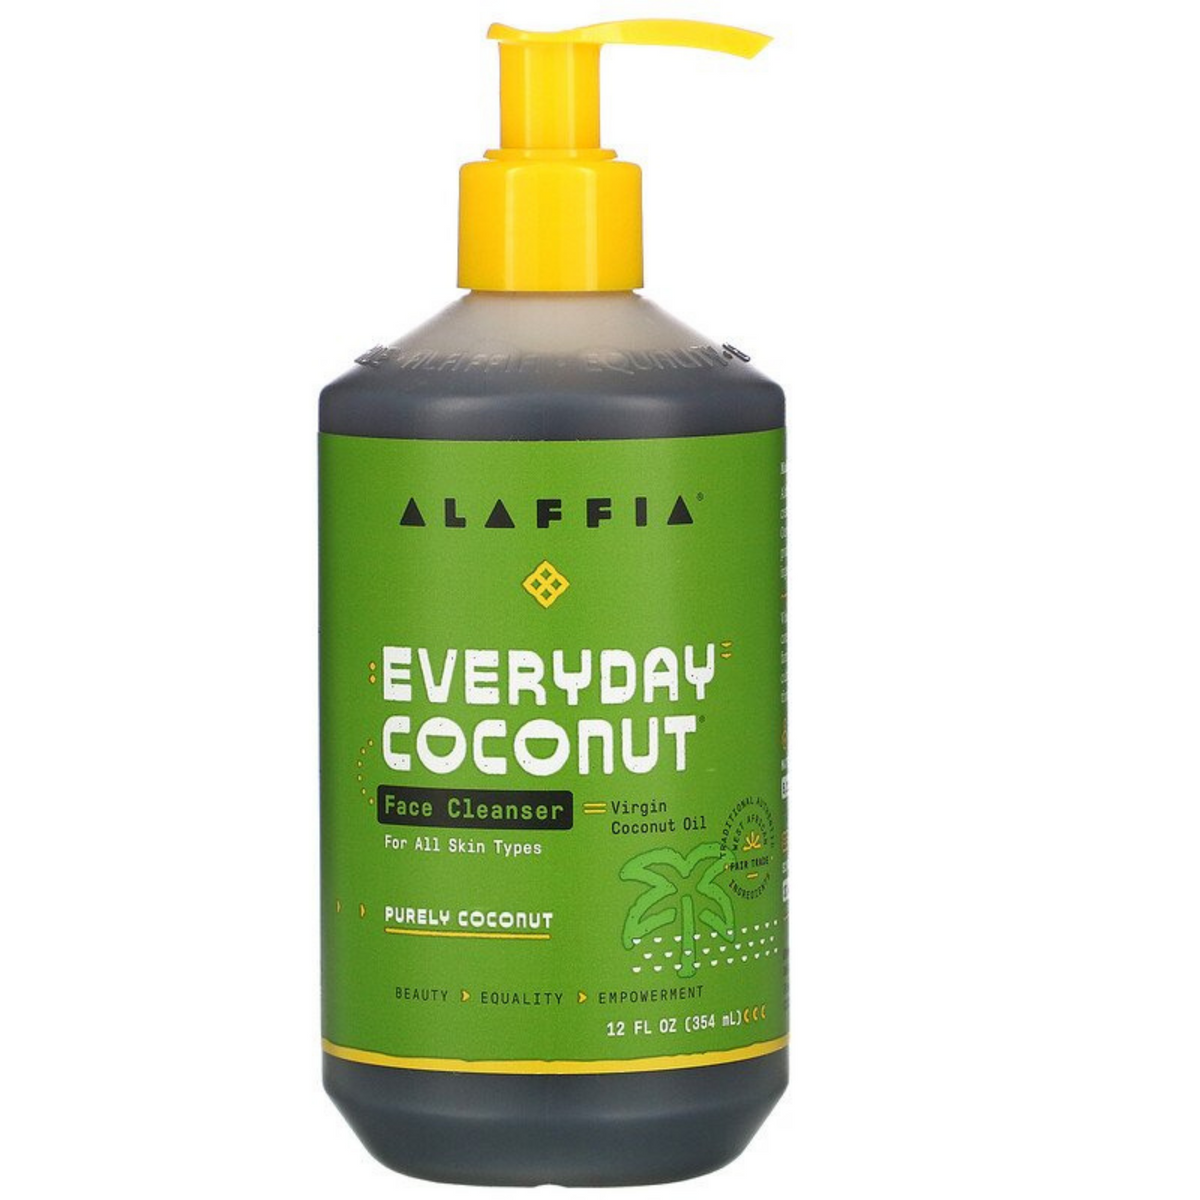 Primary Image of Everyday Coconut Lime Face Cleanser